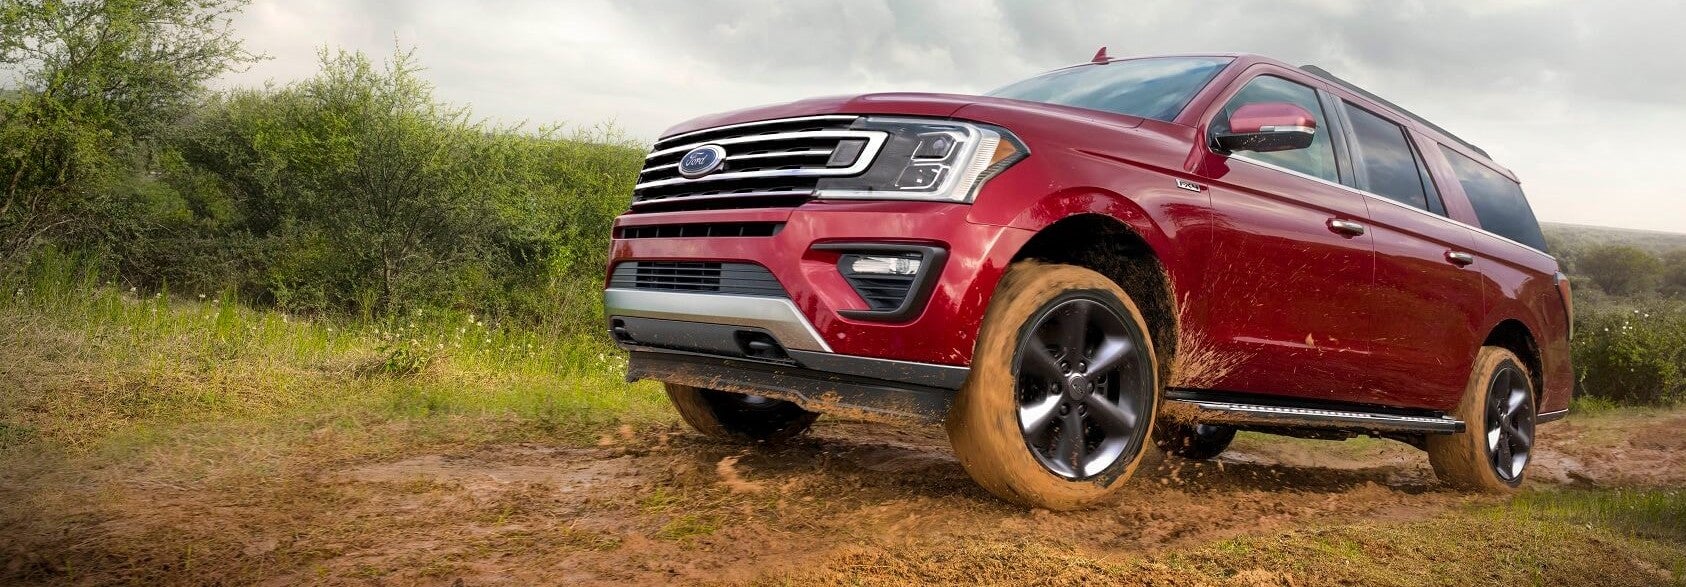 Ford Expedition Reviews